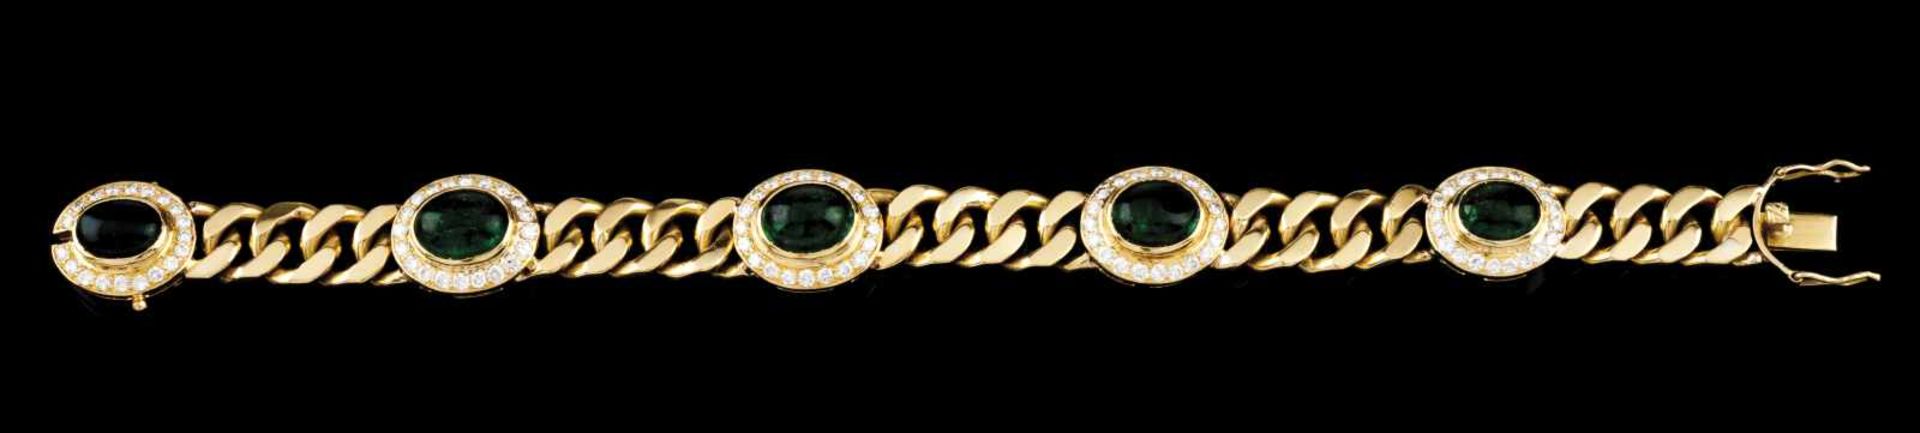 A bracelet730/000 gold beaten ring chain with 5 elements set with cabochon emeralds (10x8mm)